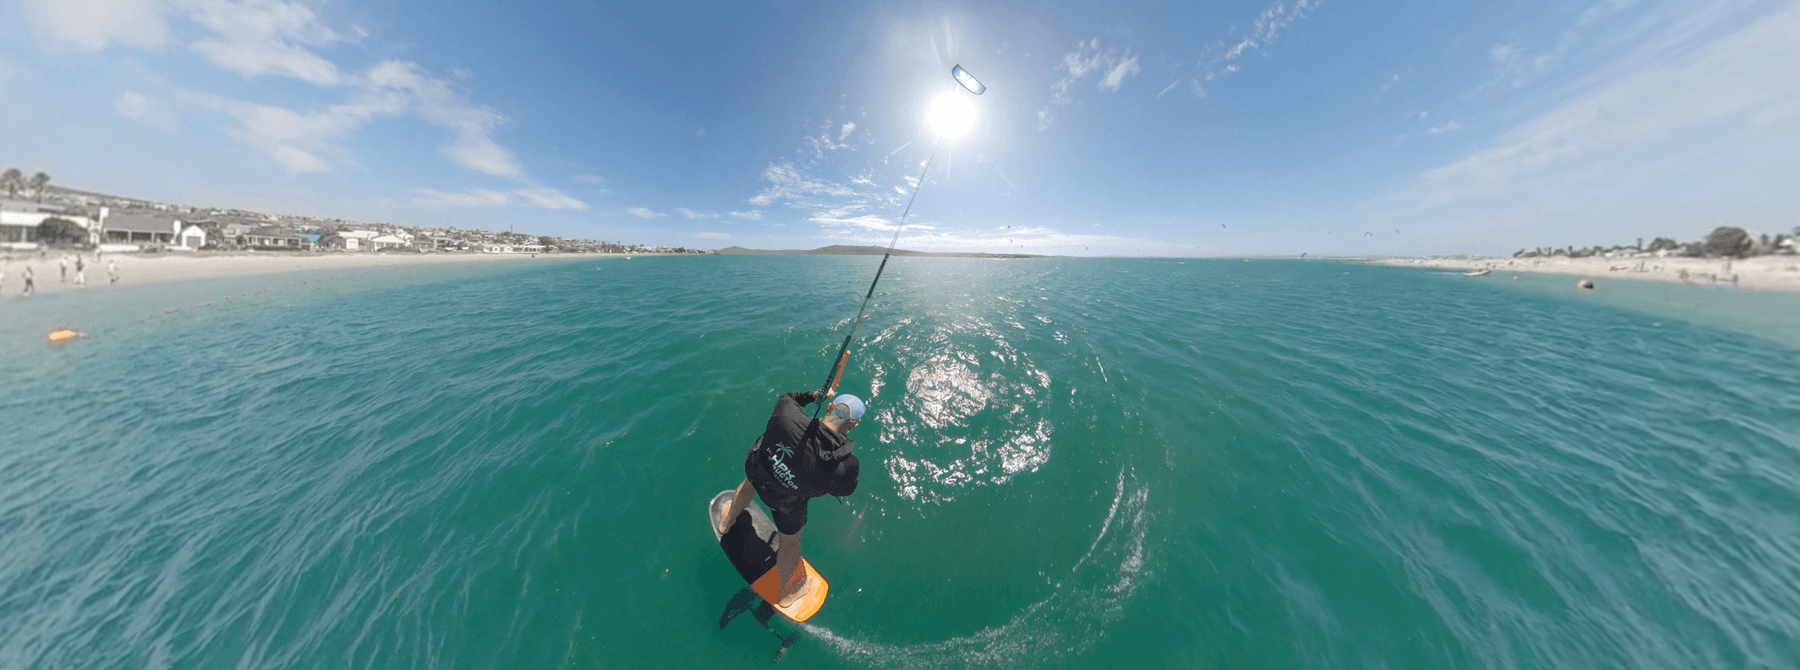 Learning to gybe on a Kite Foil with Progression Kite Coaching in South Africa - Boardworx